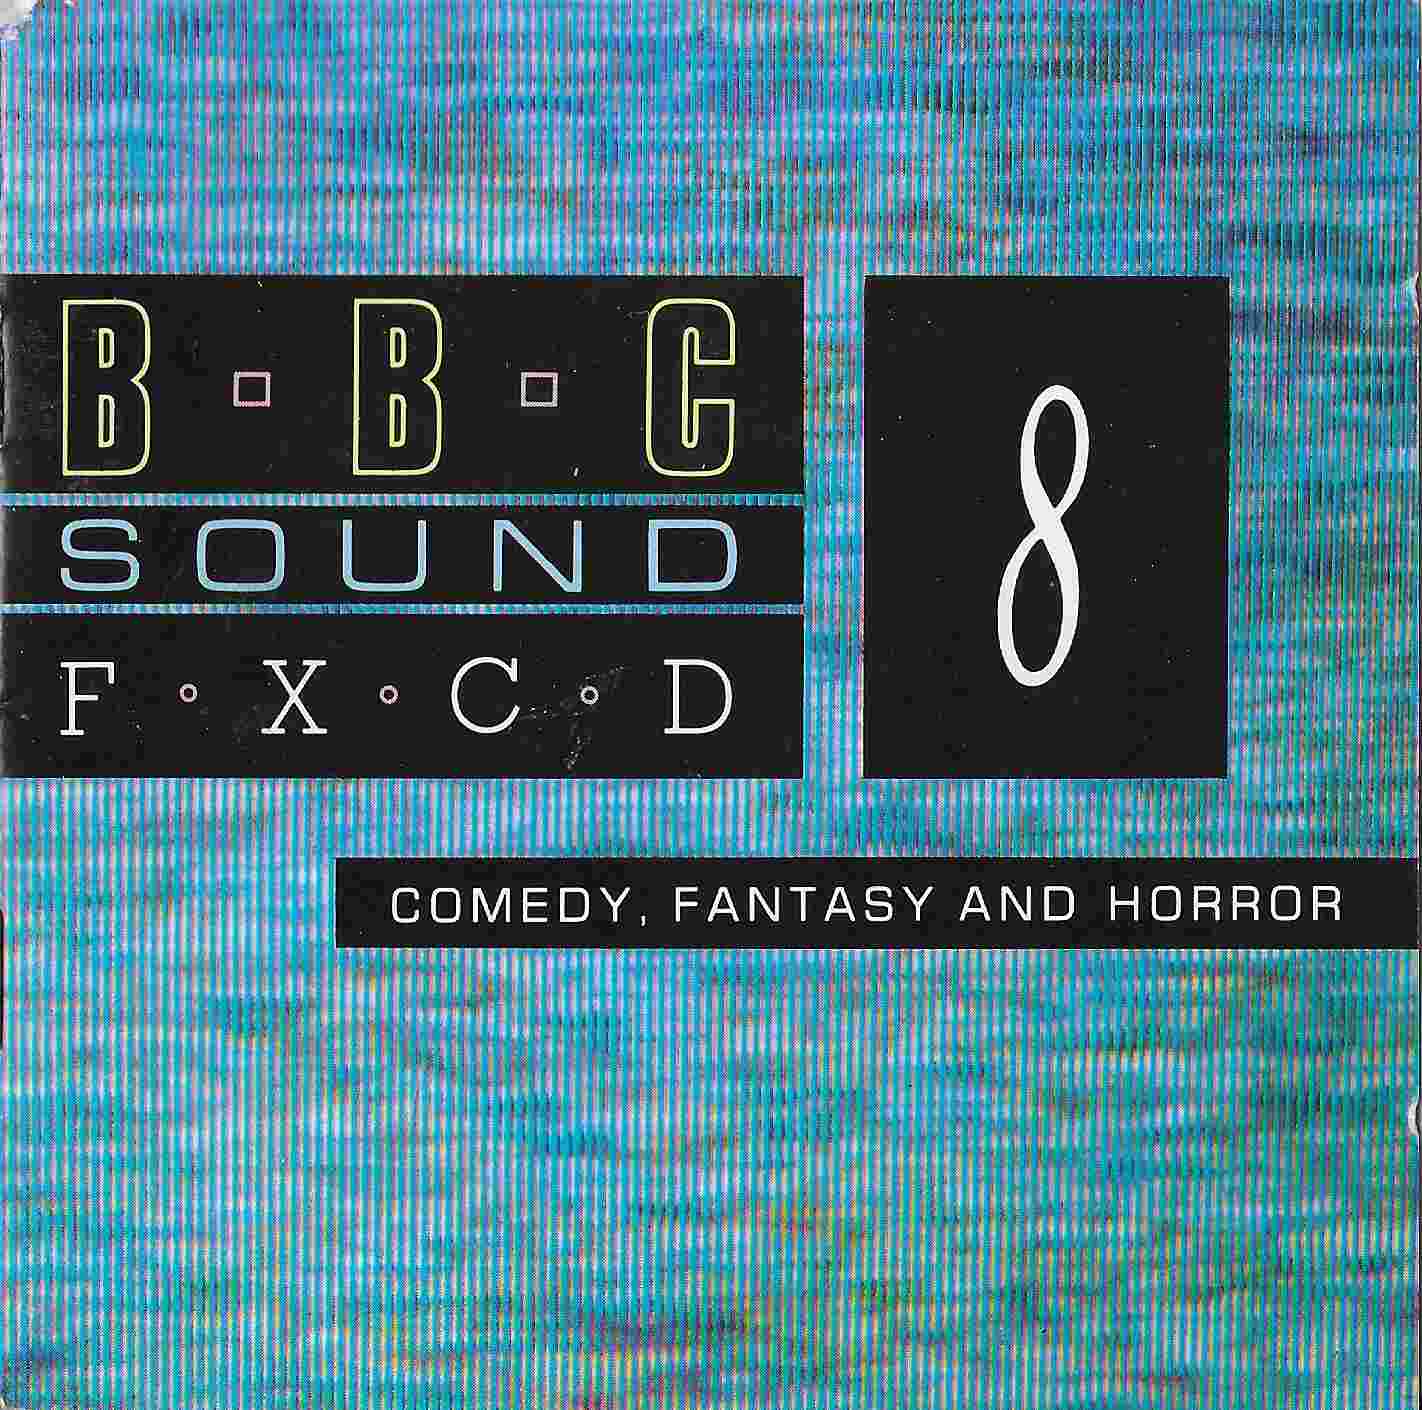 Picture of BBCCD SFX008 Comedy, fantasy and humour by artist Various from the BBC cds - Records and Tapes library